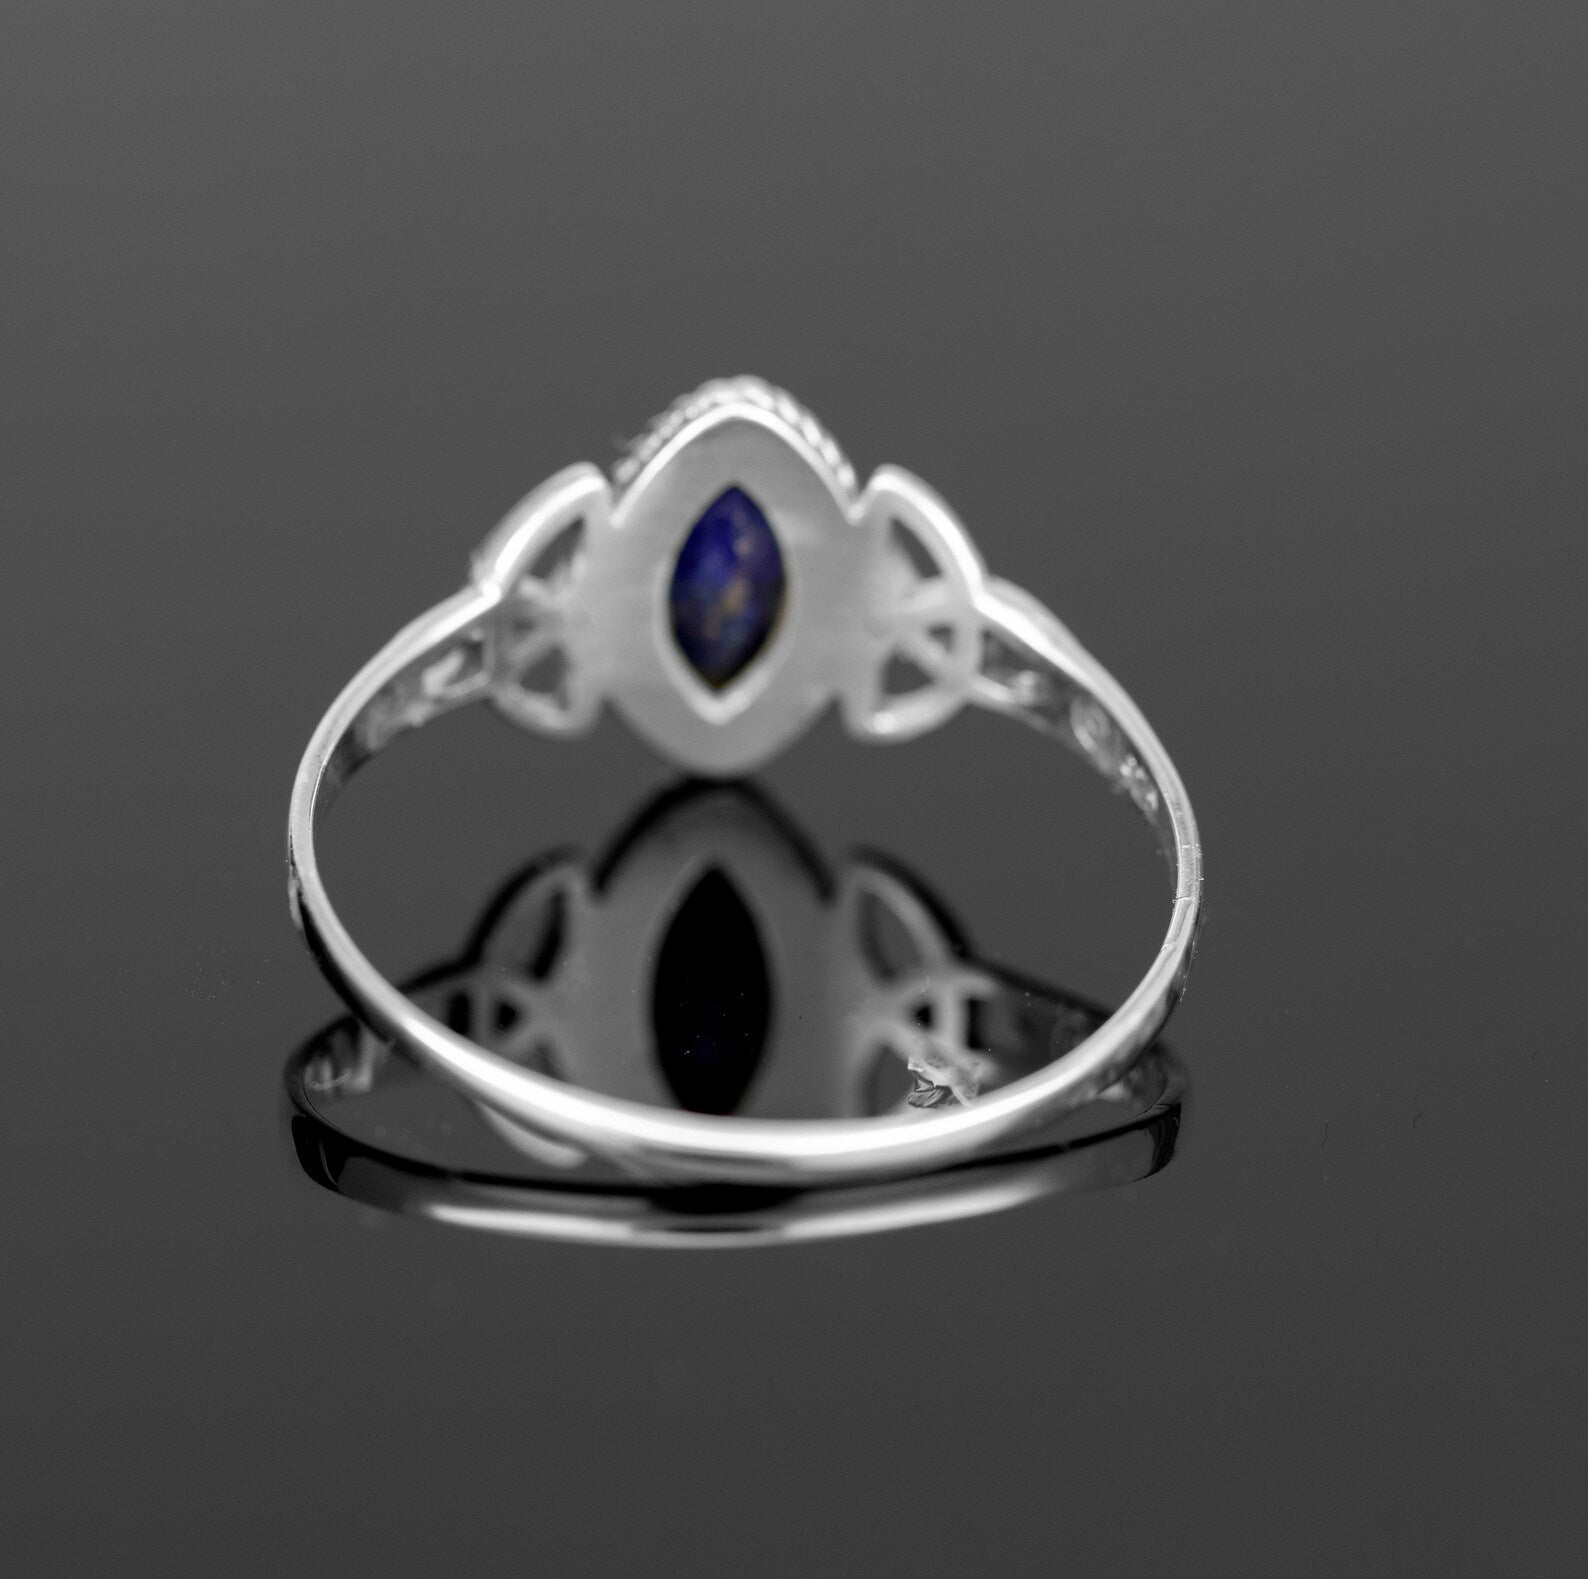 Marquise Blue Sapphire 925 Sterling Silver Gemstone Ladies Ring Jewellery Gift Boxed Jewelery